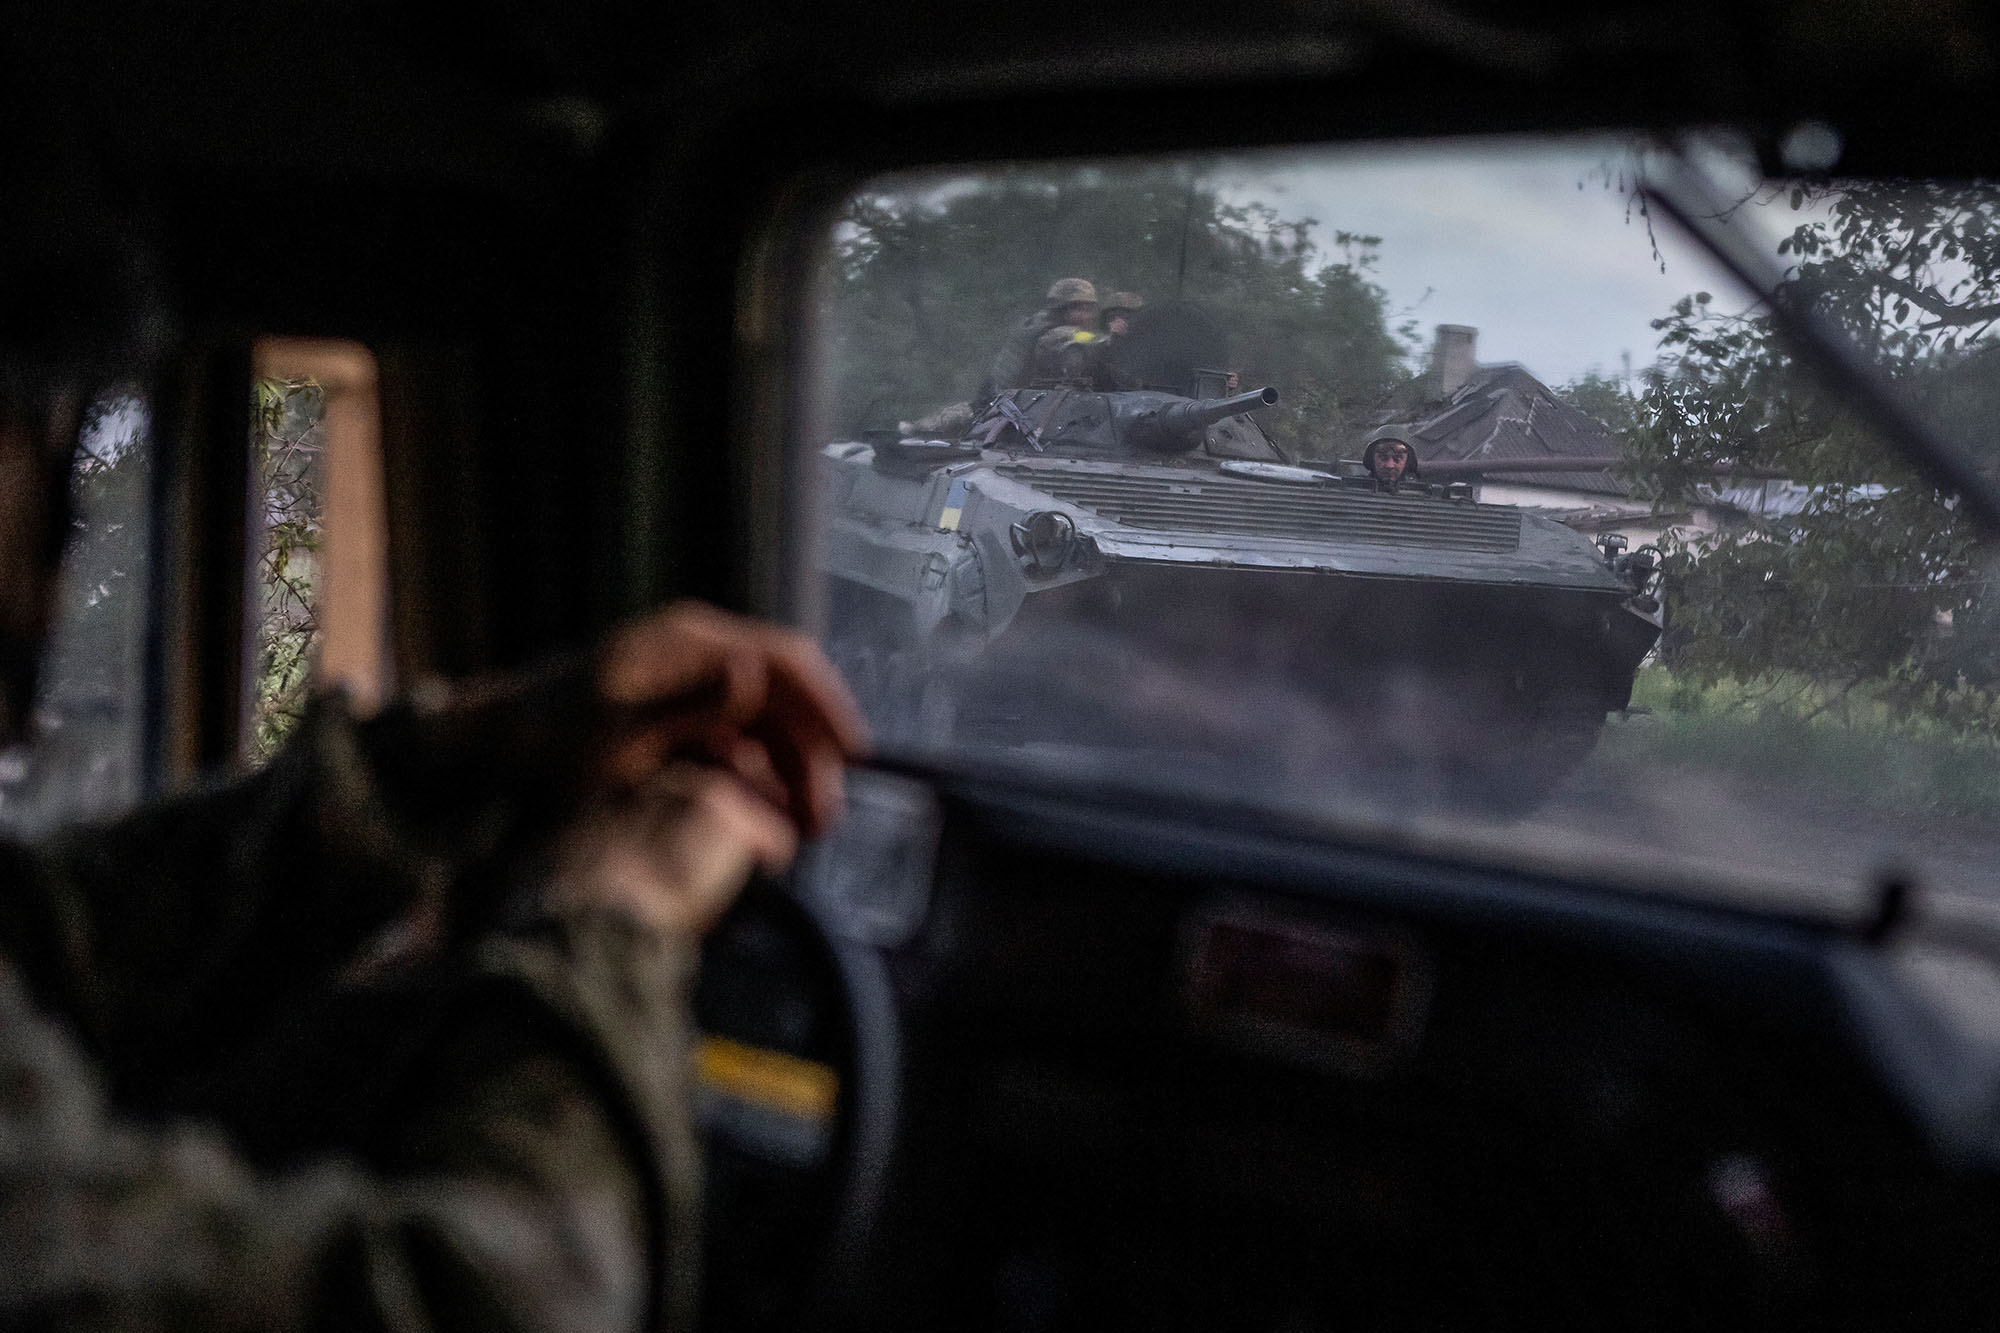 Ukrainian service members ride atop of a BMP-1 infantry fighting vehicle near the frontline town of Bakhmut in Donetsk region, Ukraine, on May 23.